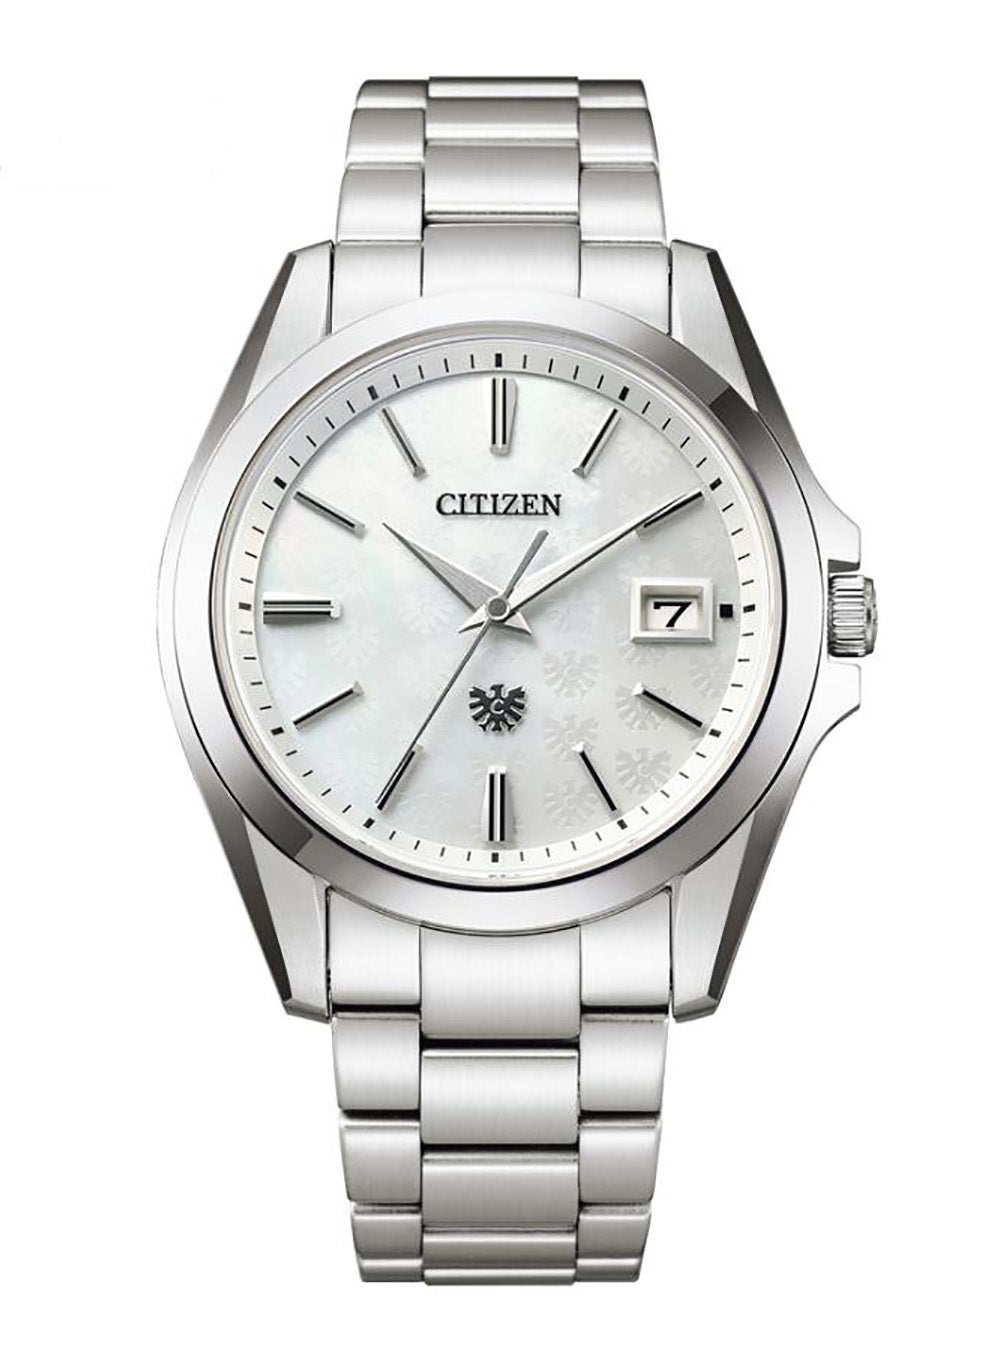 CITIZEN THE CITIZEN AQ4060-50W LIMITED EDITION MADE IN JAPAN JDMWRISTWATCHjapan-select